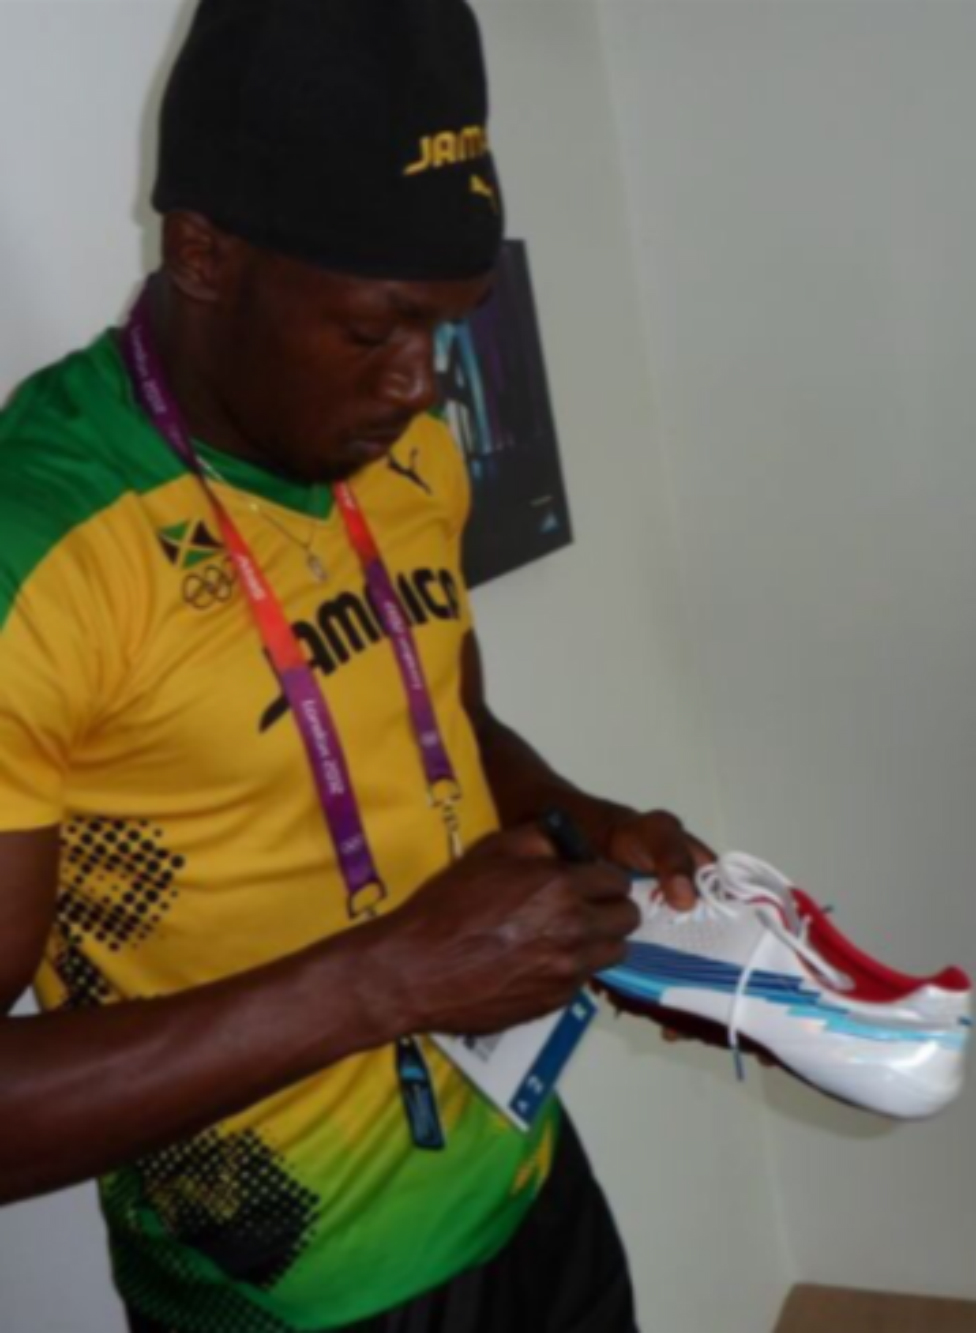 usain bolt sneakers